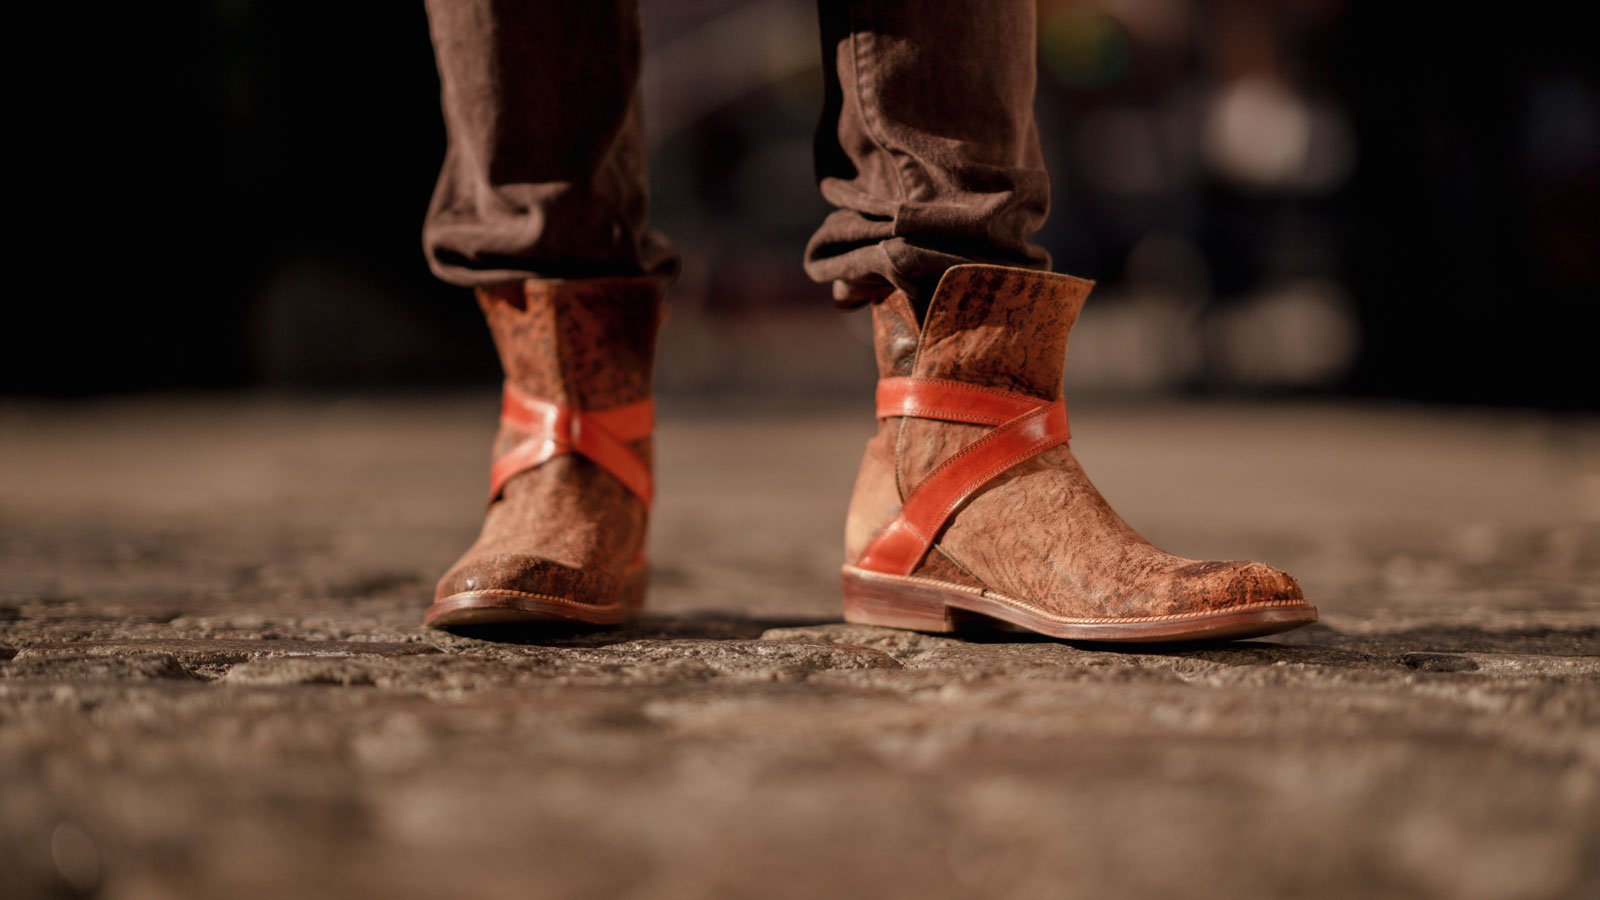 Design
The Jodphur is part of the capsule collection head to toe designed in collaboration with Modernvice carefully handcrafted in NYC. A brown distressed lamb leather, complemented with a vibrant orange leather crossing straps with buckle.Each shoe, finished by a skilled artisan, features a rounded toe, a 30 mm heel, hand-engraved leather soles, hand-stitched inner soles. Very limited edition! Orlando's favorite!
Material
- Upper material 100% lamb- Lining and insole material 100% Kangaroo leather lamb- Outsole Material: 100% sole cowhide 
Specifications
- Rounded toe- 30 mm heel- Hand-engraved leather soles- Hand-stitched inner soles- Vibrant orange leather crossing straps with buckle- Handcrafted in NYC in collaboration with Modernvice 